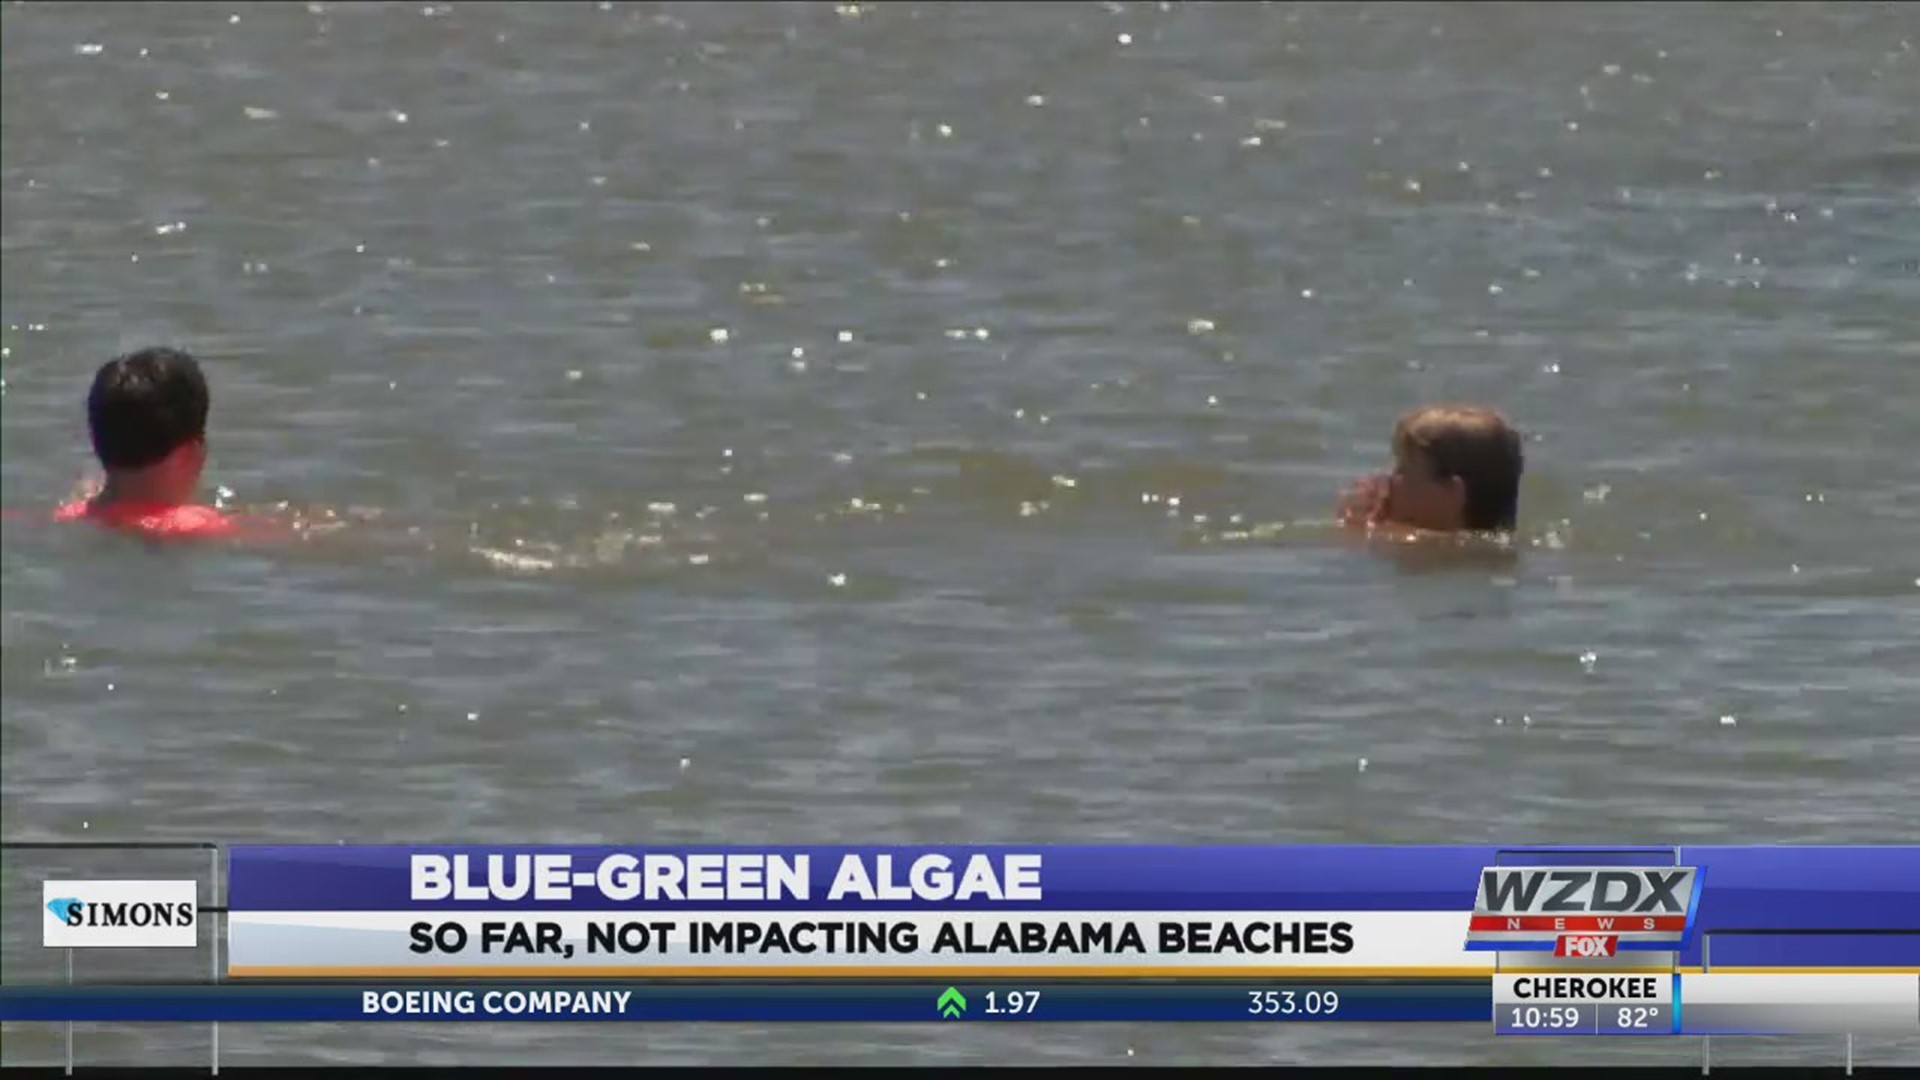 The latest testing shows that the huge algae problem impacting Mississippi beaches has not reached Alabama beaches just yet.